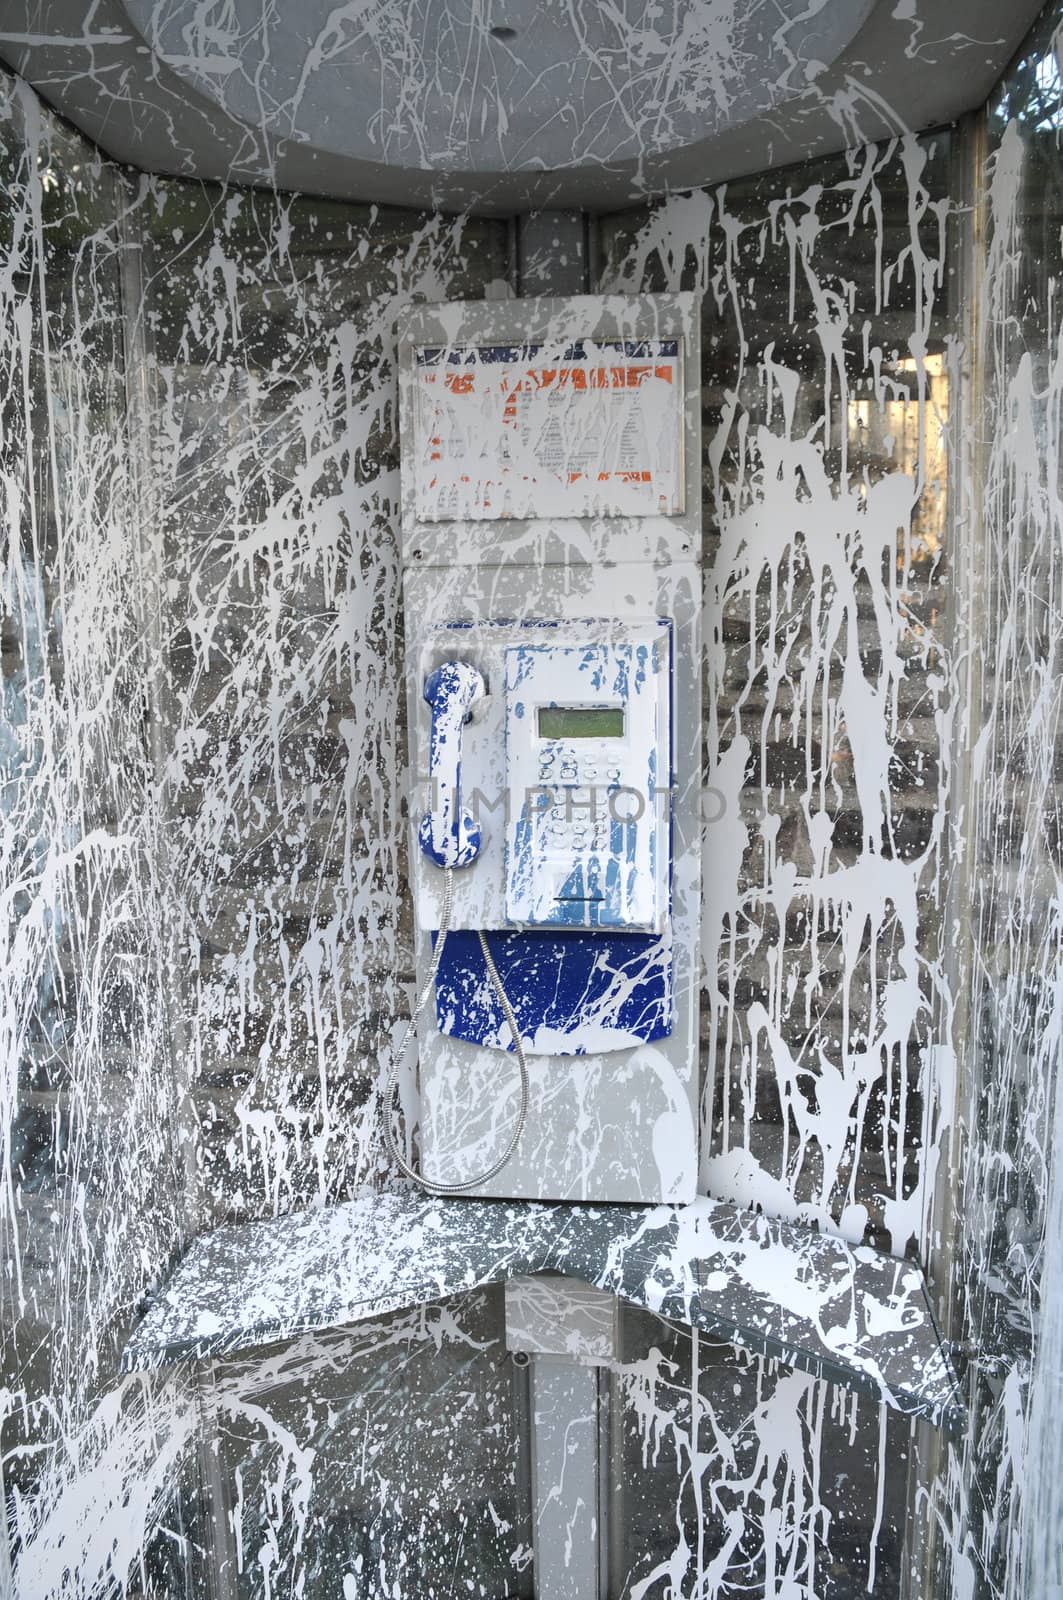 Public Telephone Cabin Vandalized with White Paint